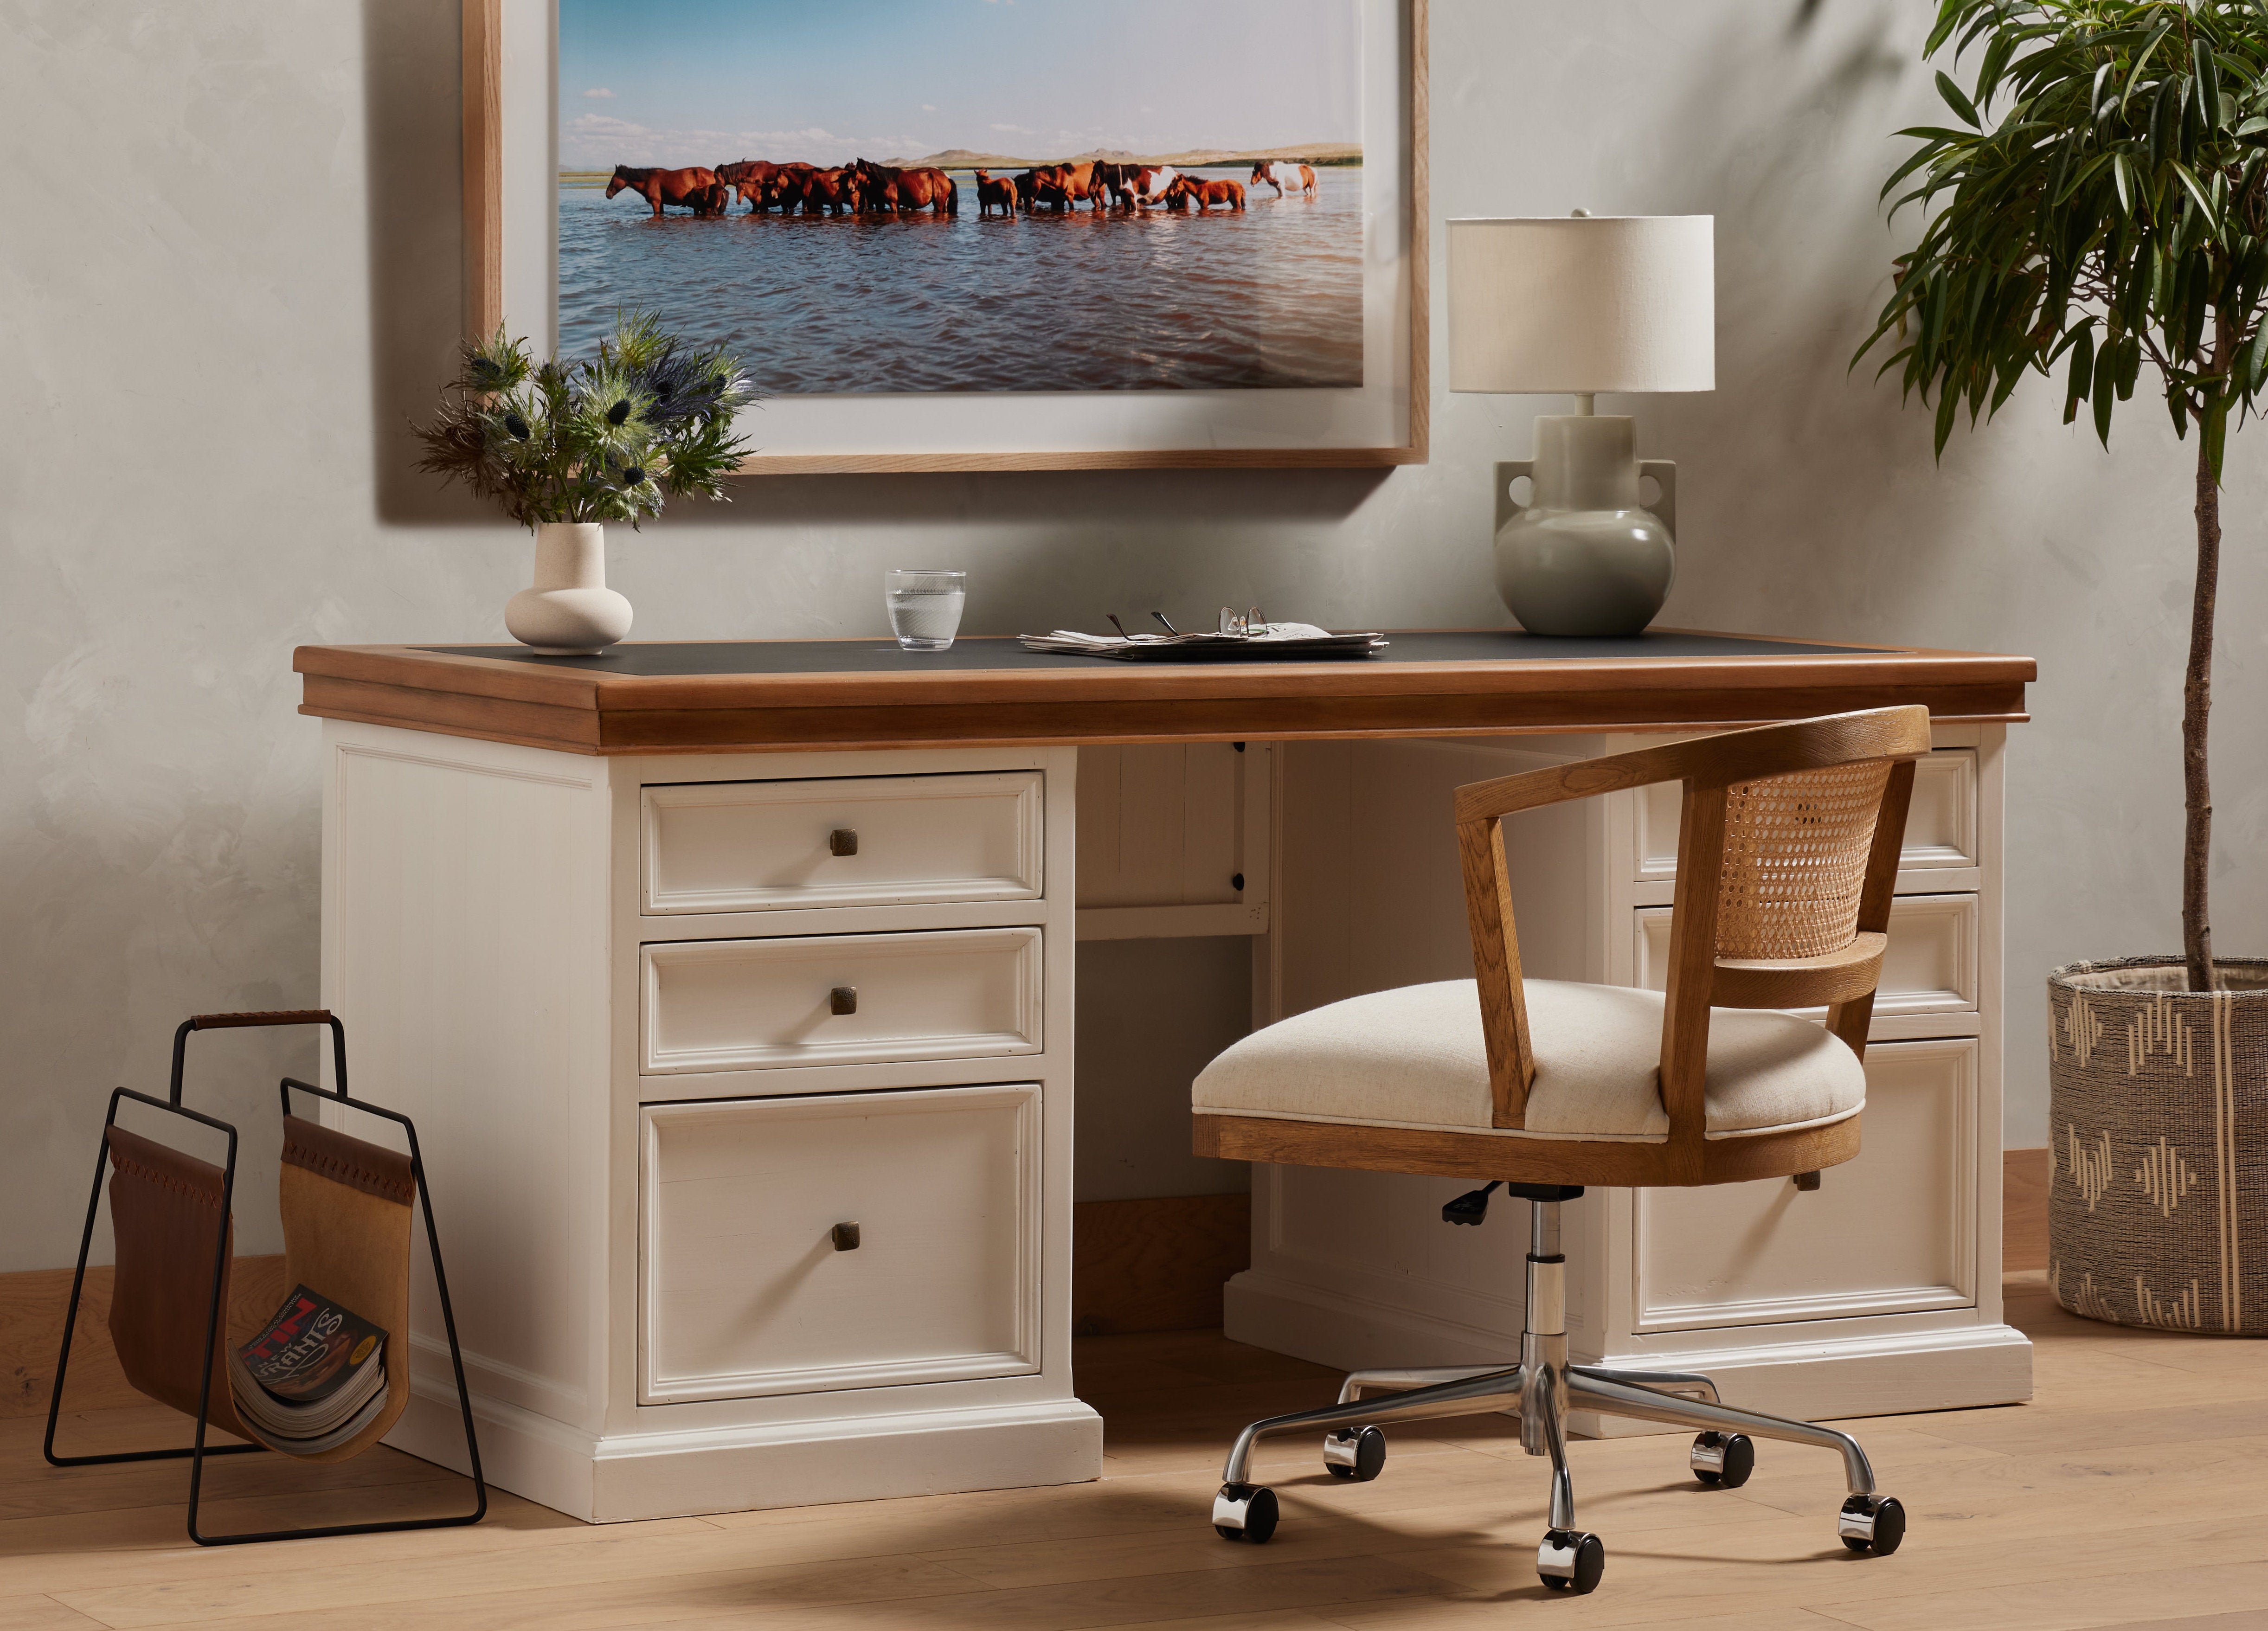 Must-Have Furniture for Your Home Office